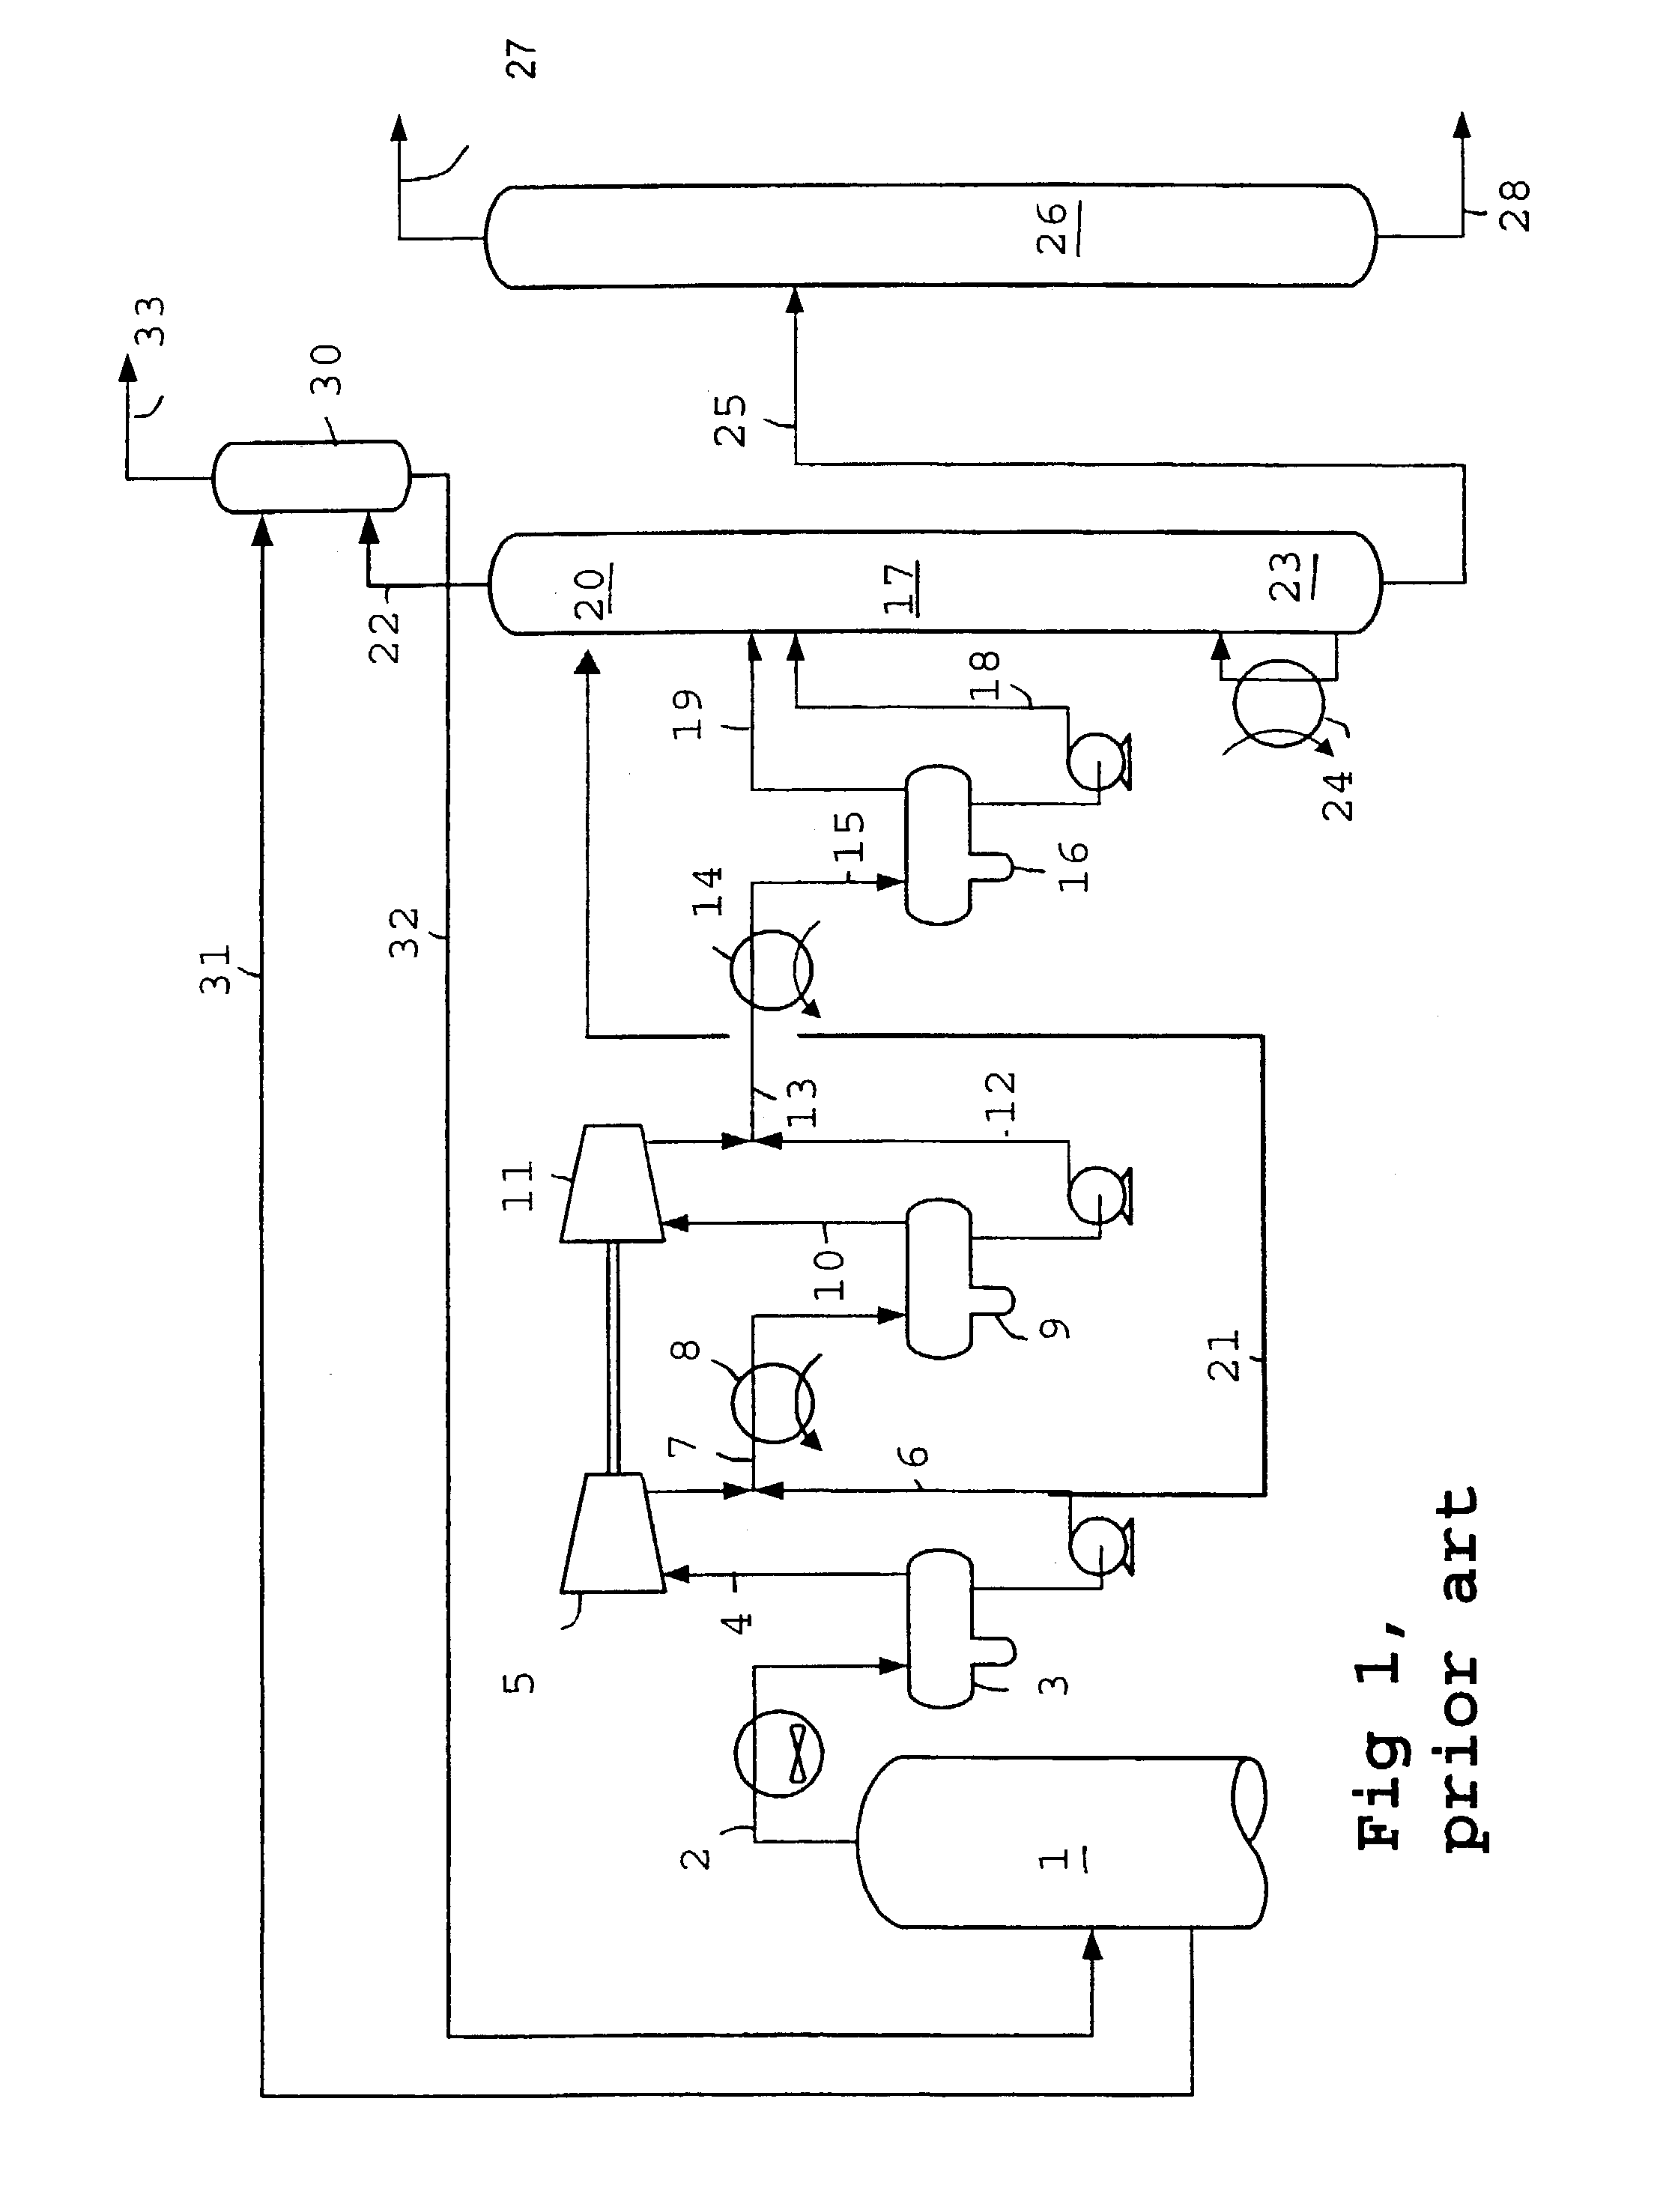 Use of low pressure distillate as absorber oil in a FCC recovery section